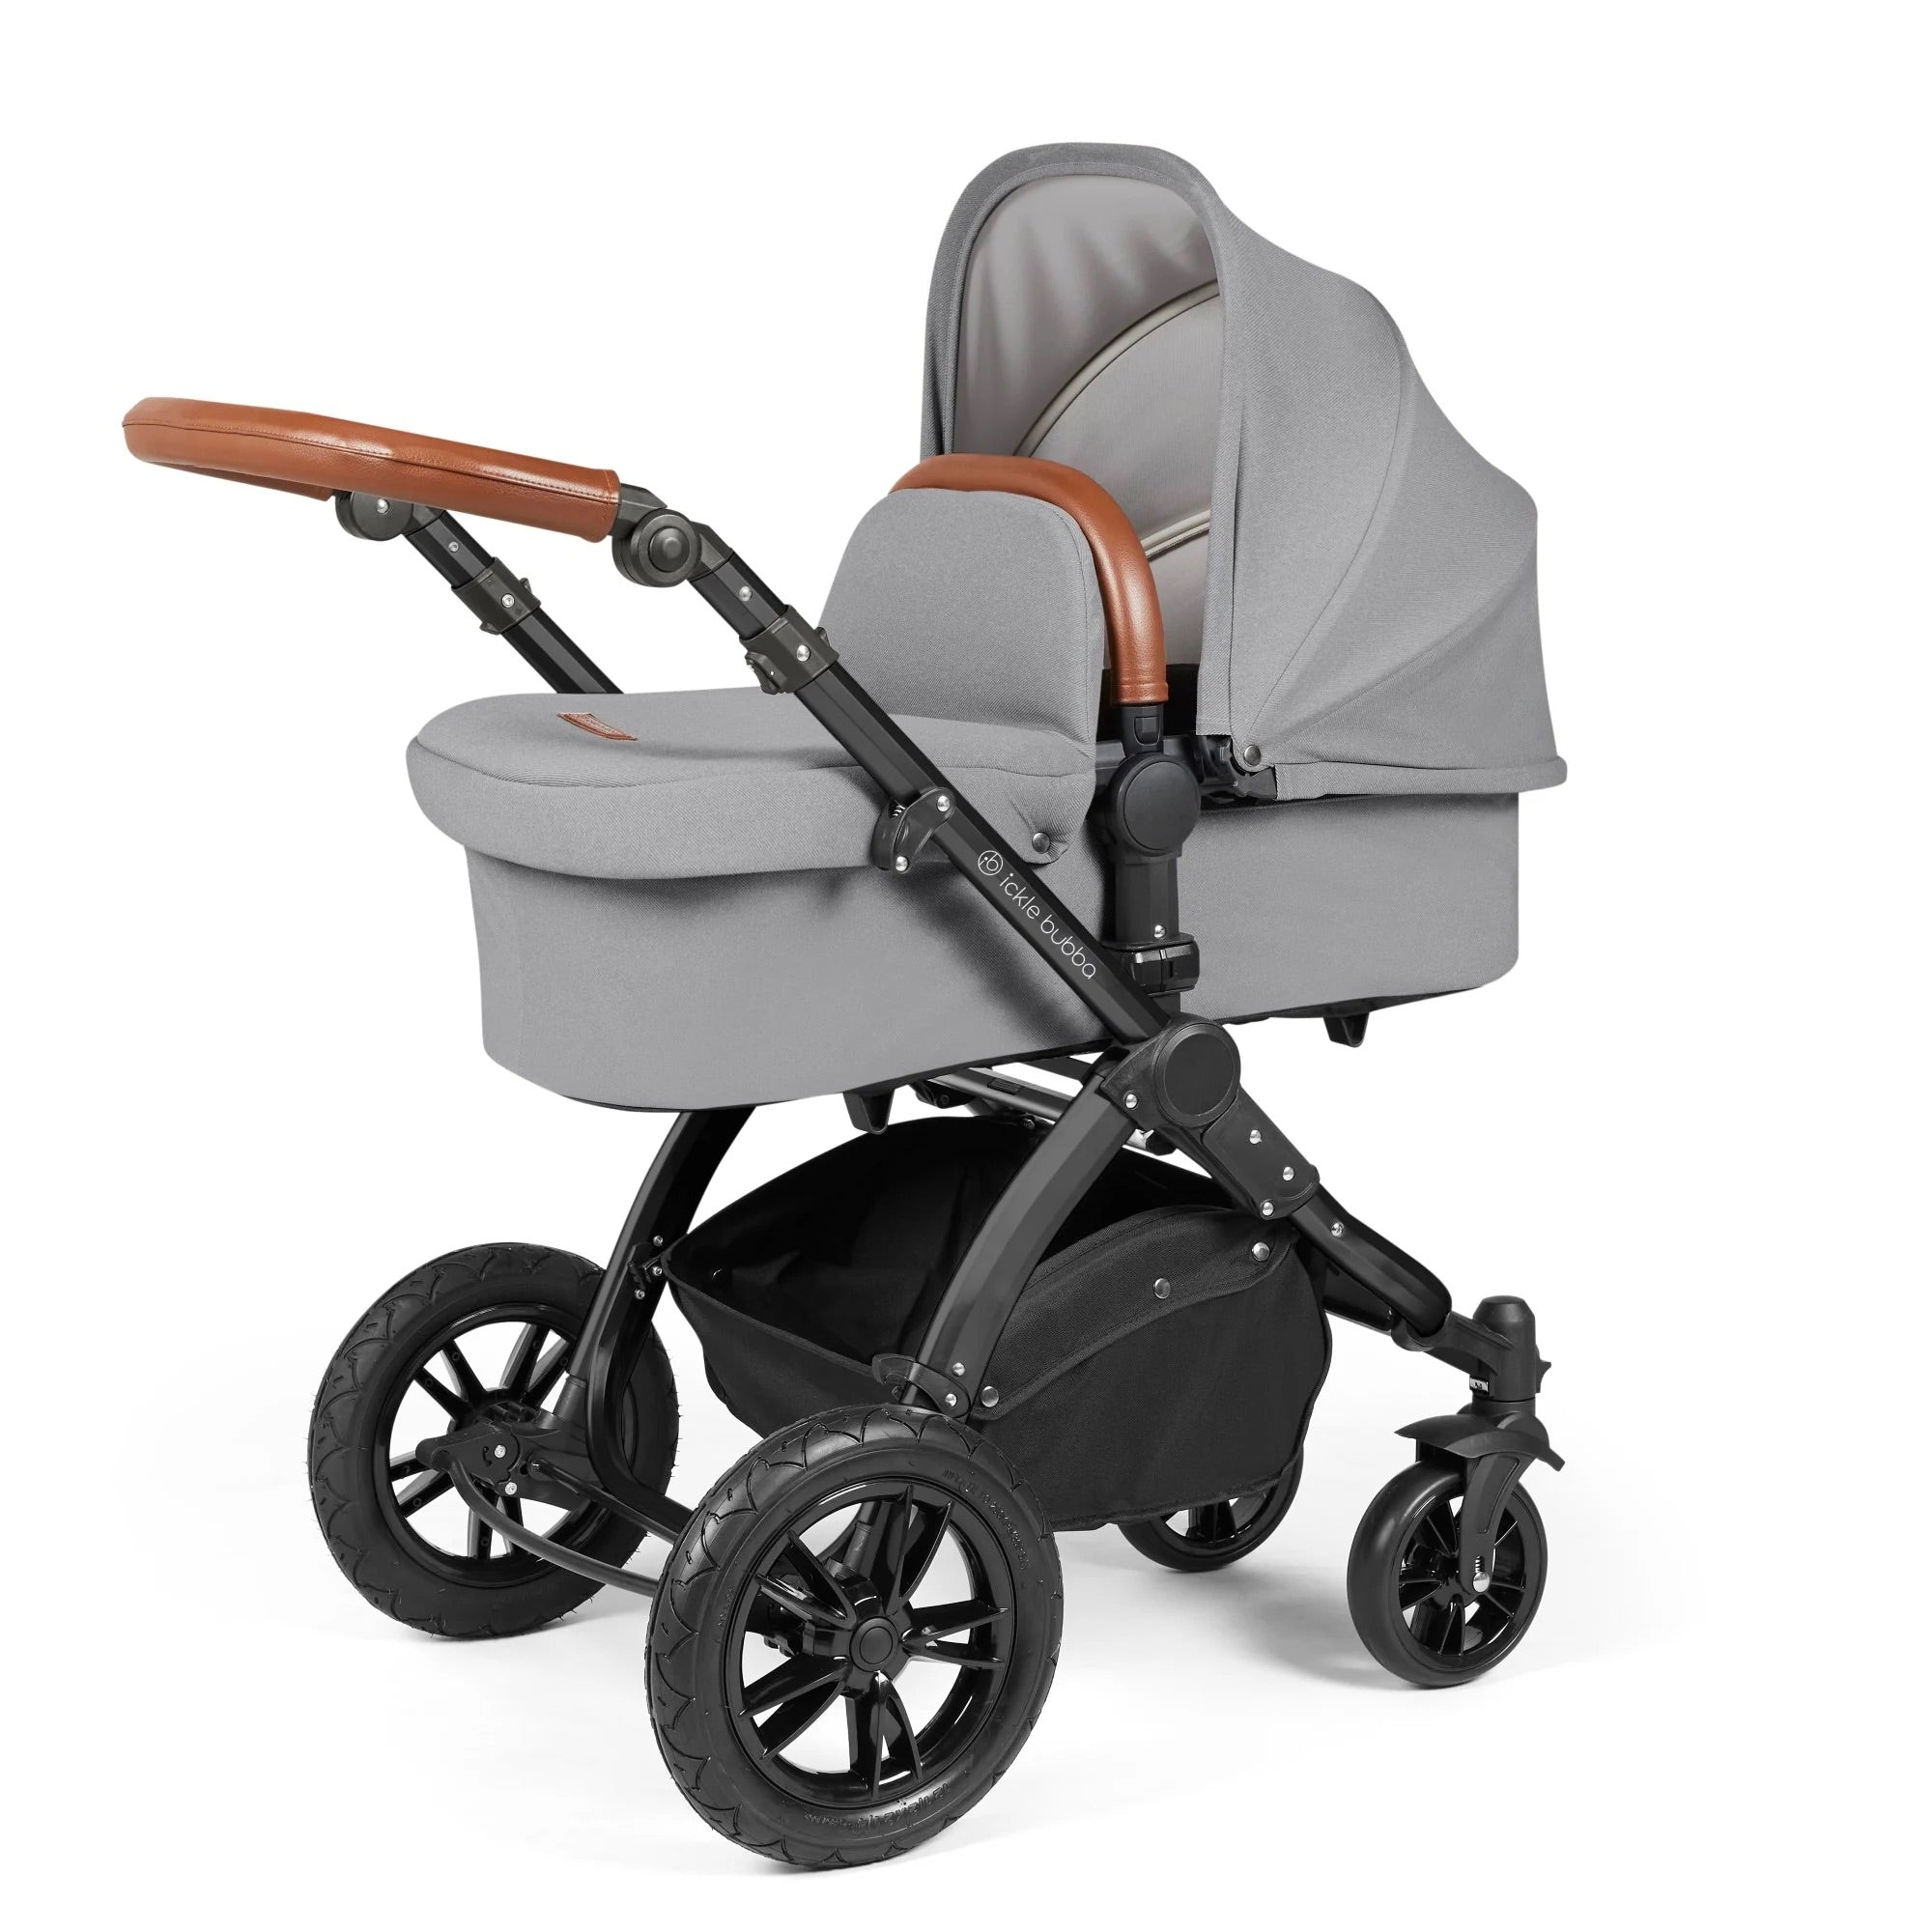 Ickle Bubba Stomp Luxe 2 in 1 Pushchair - Black / Pearl Grey / Tan - For Your Little One